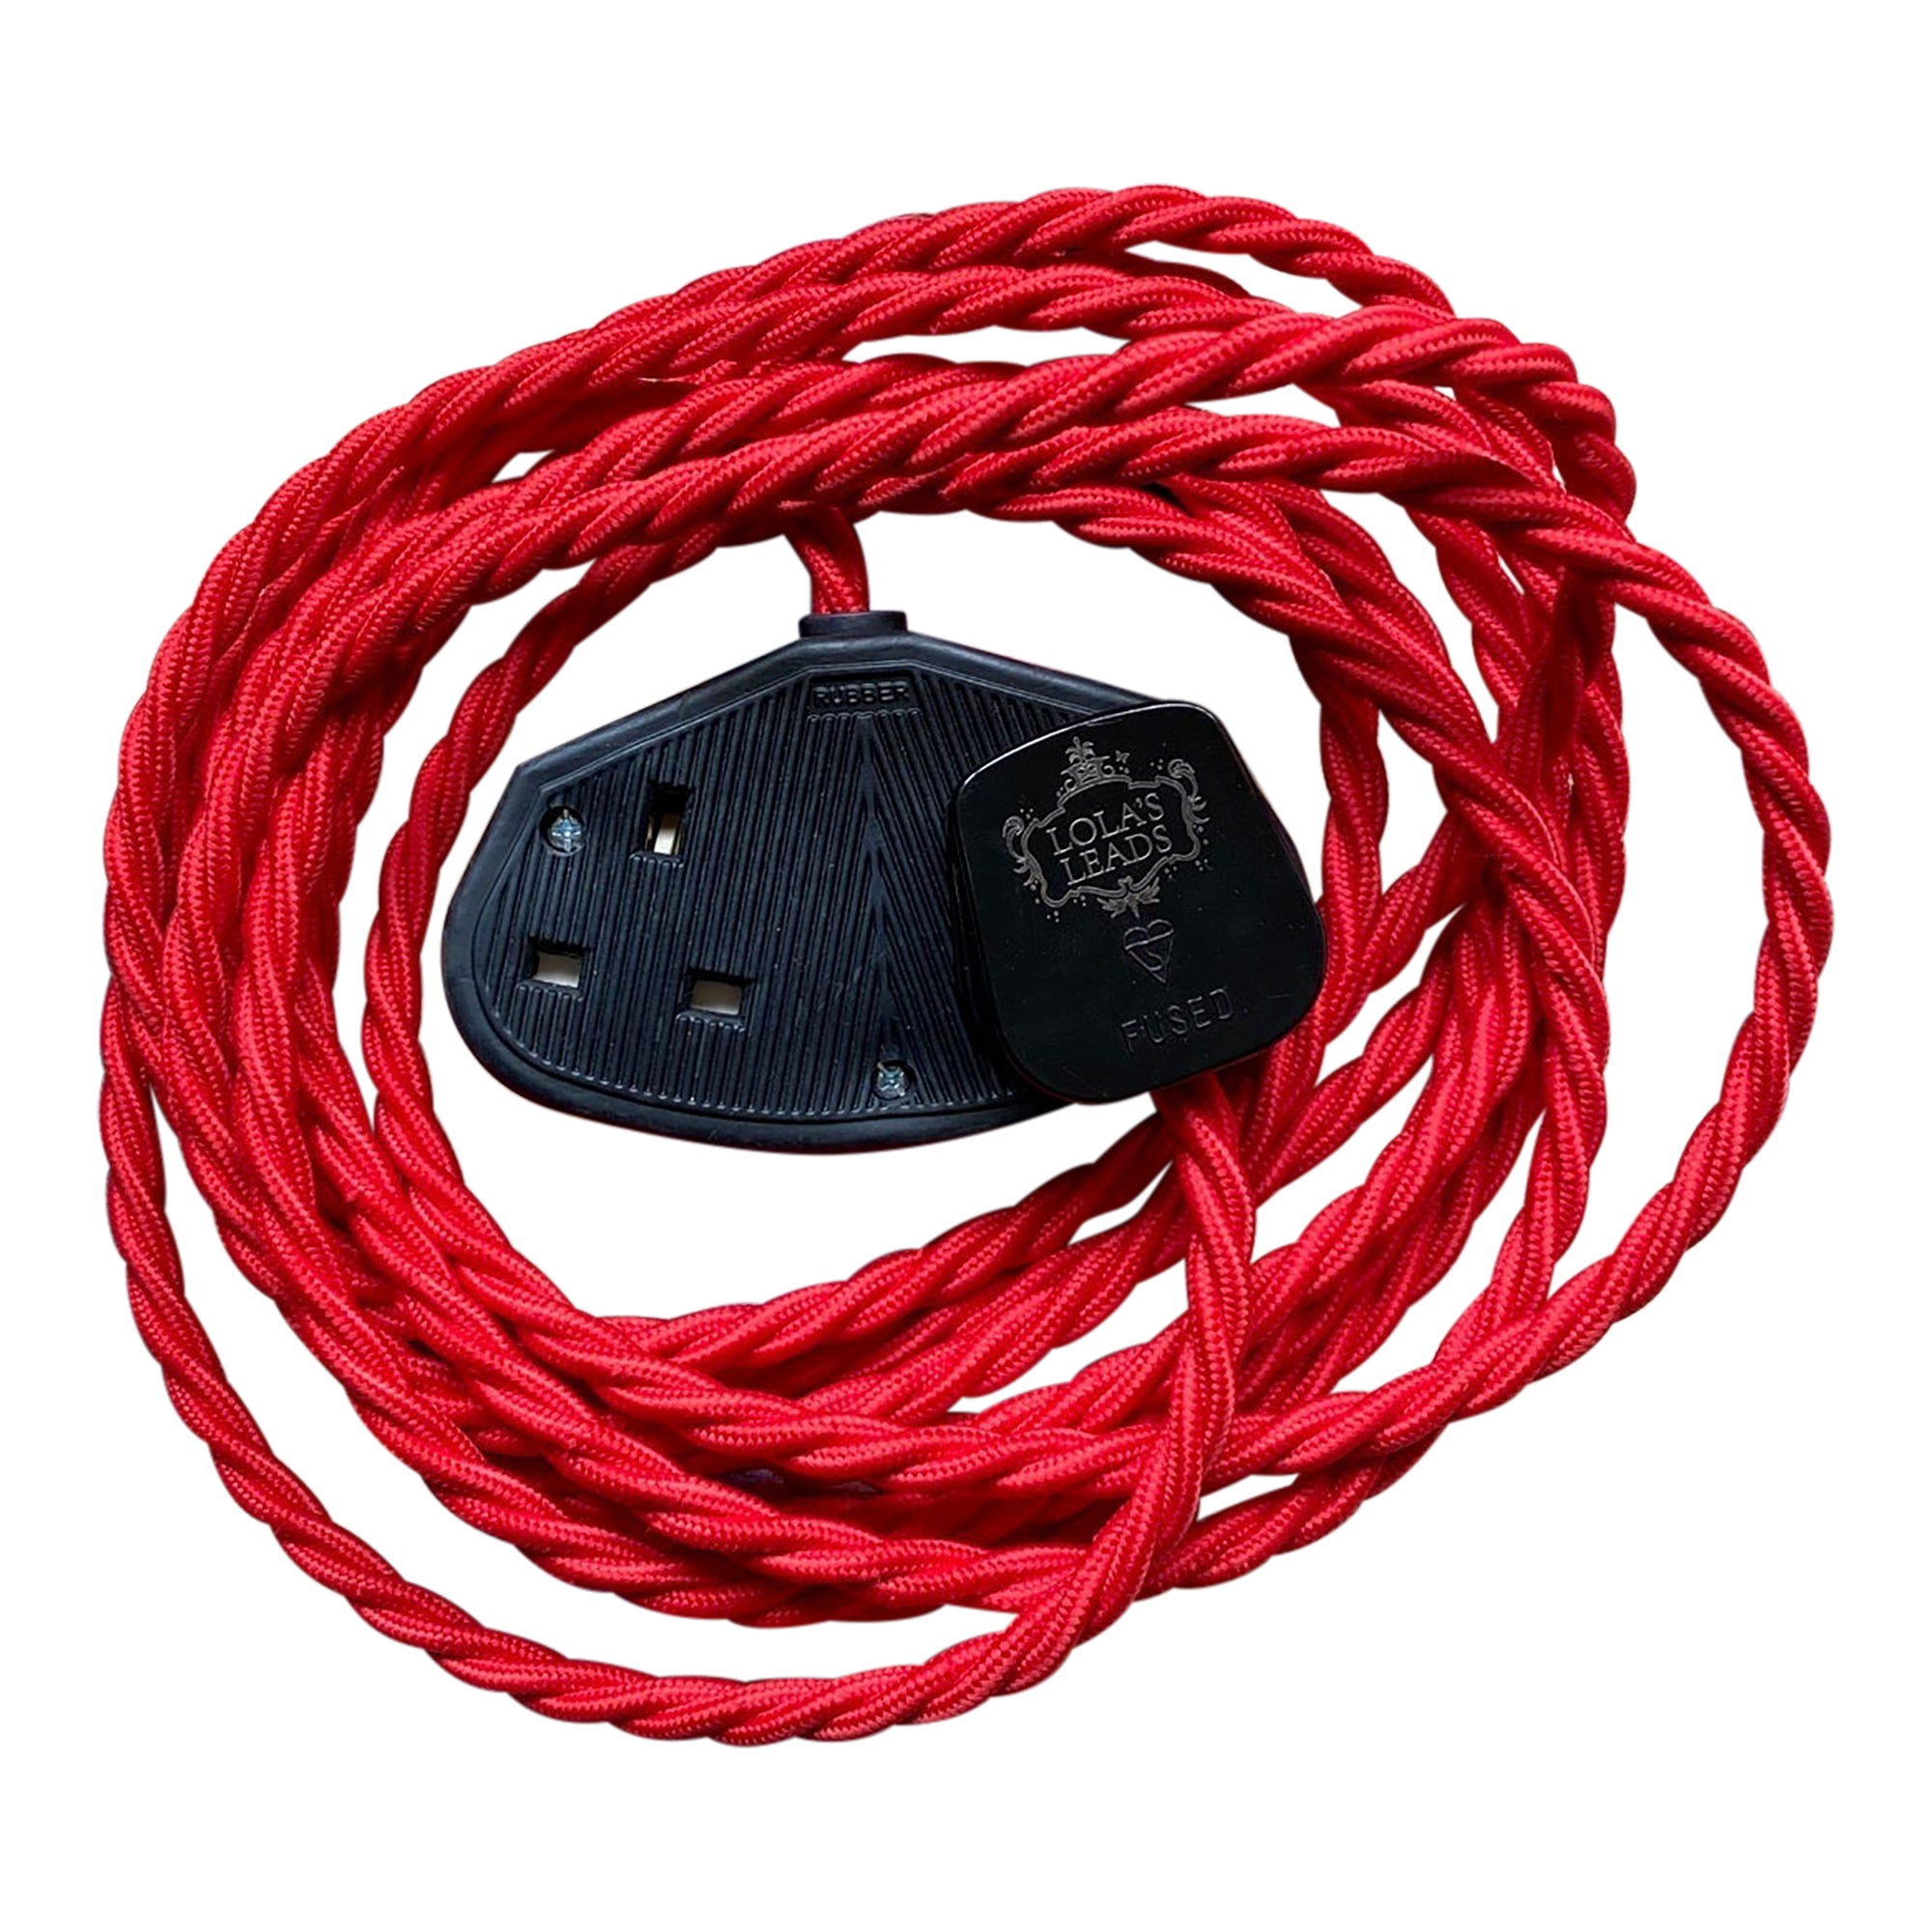 Scarlet - Lola's Leads Fabric Extension Cable